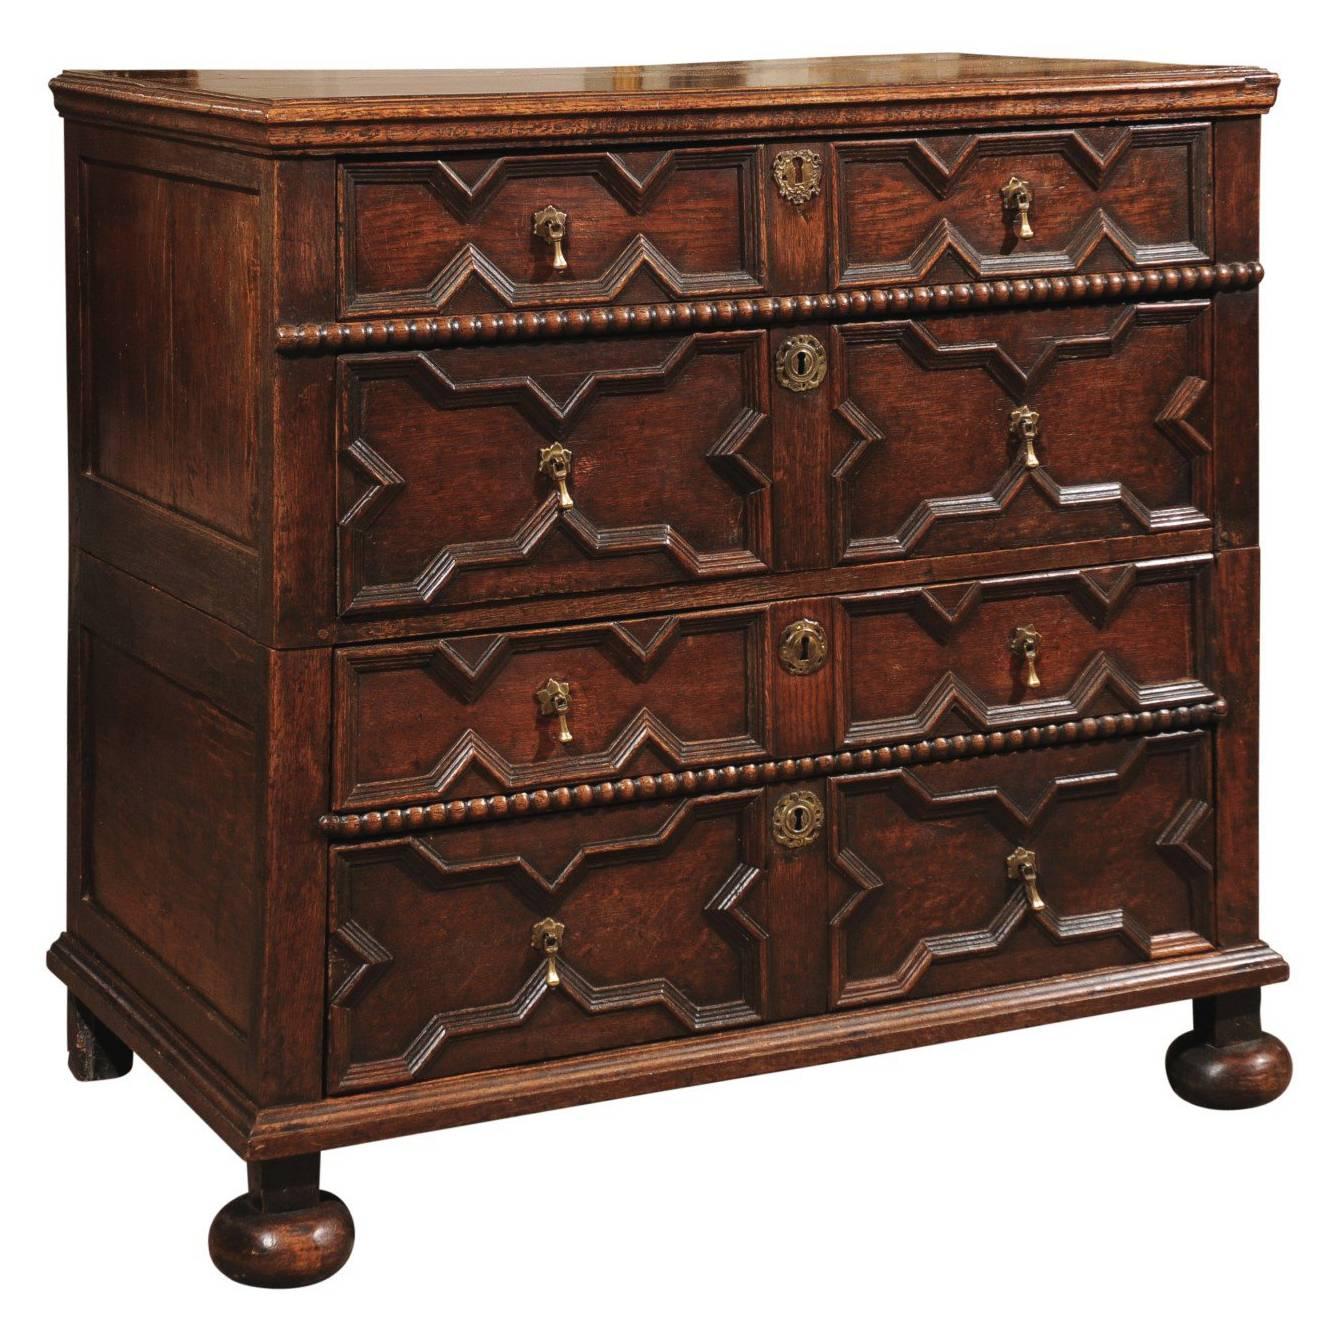 18th Century English Jacobean Style Oak Chest with Four Drawers and Bun Feet